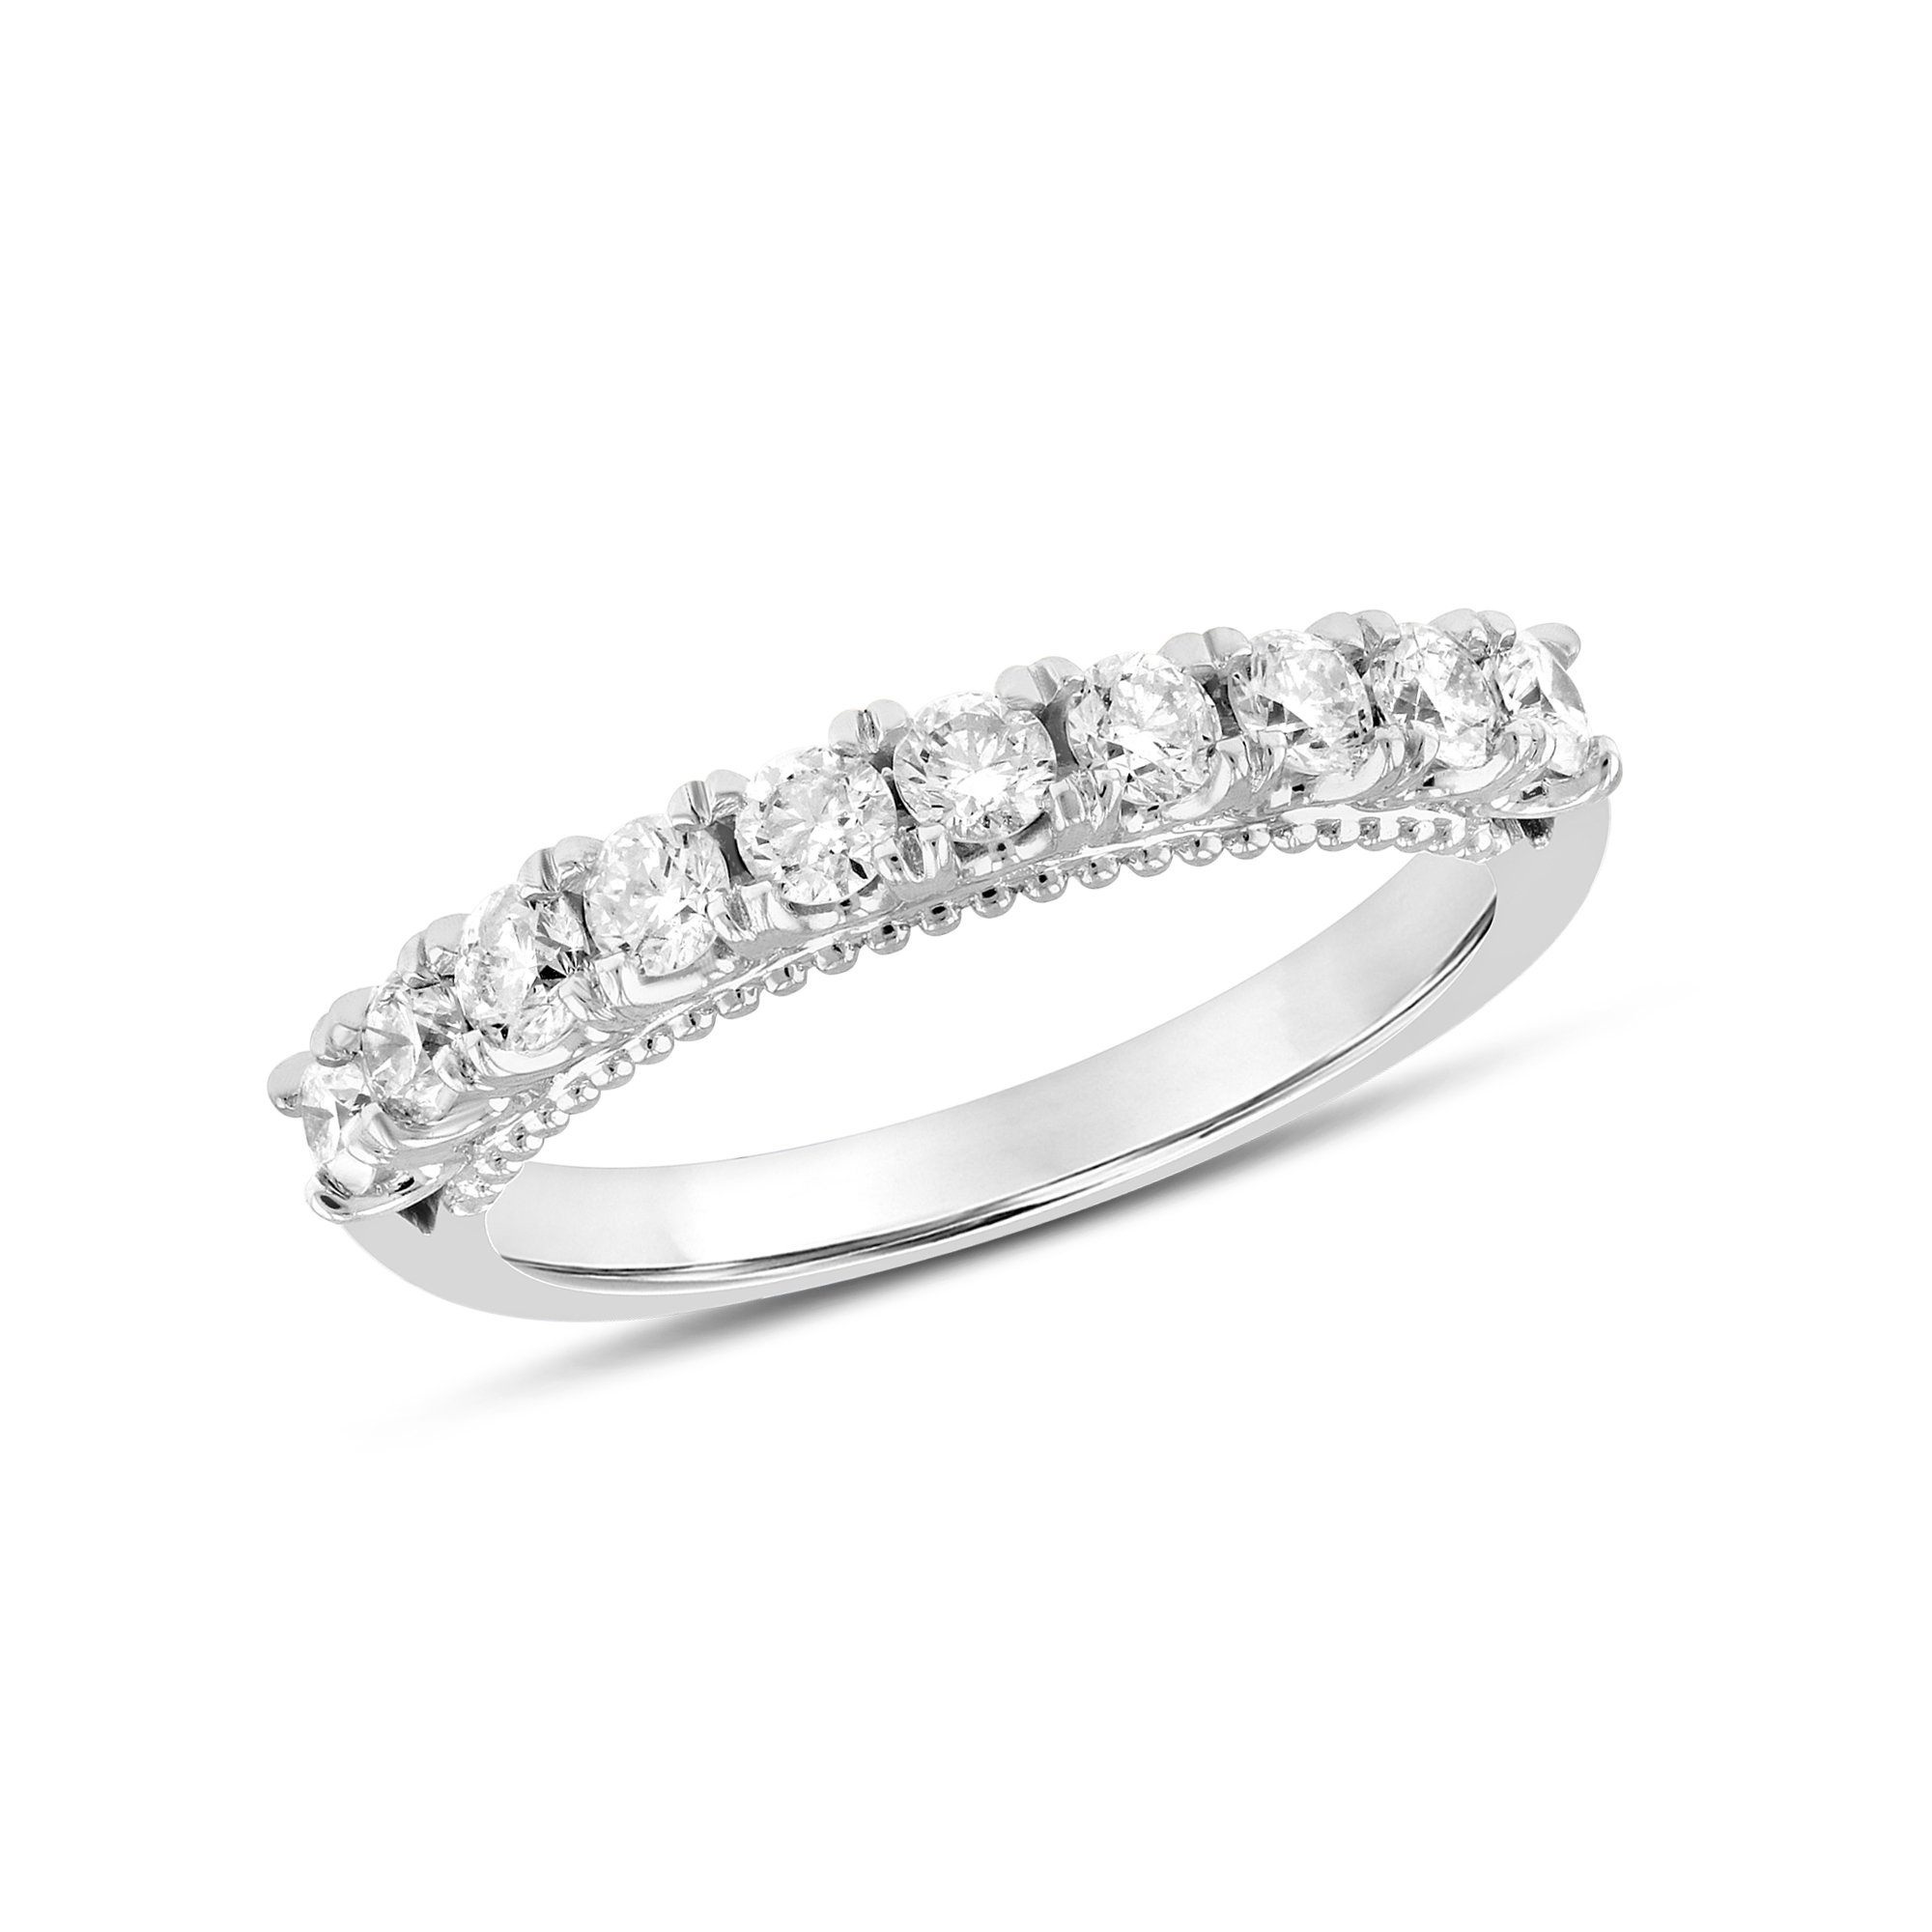 View 0.70ctw Diamond Band in 14k White Gold